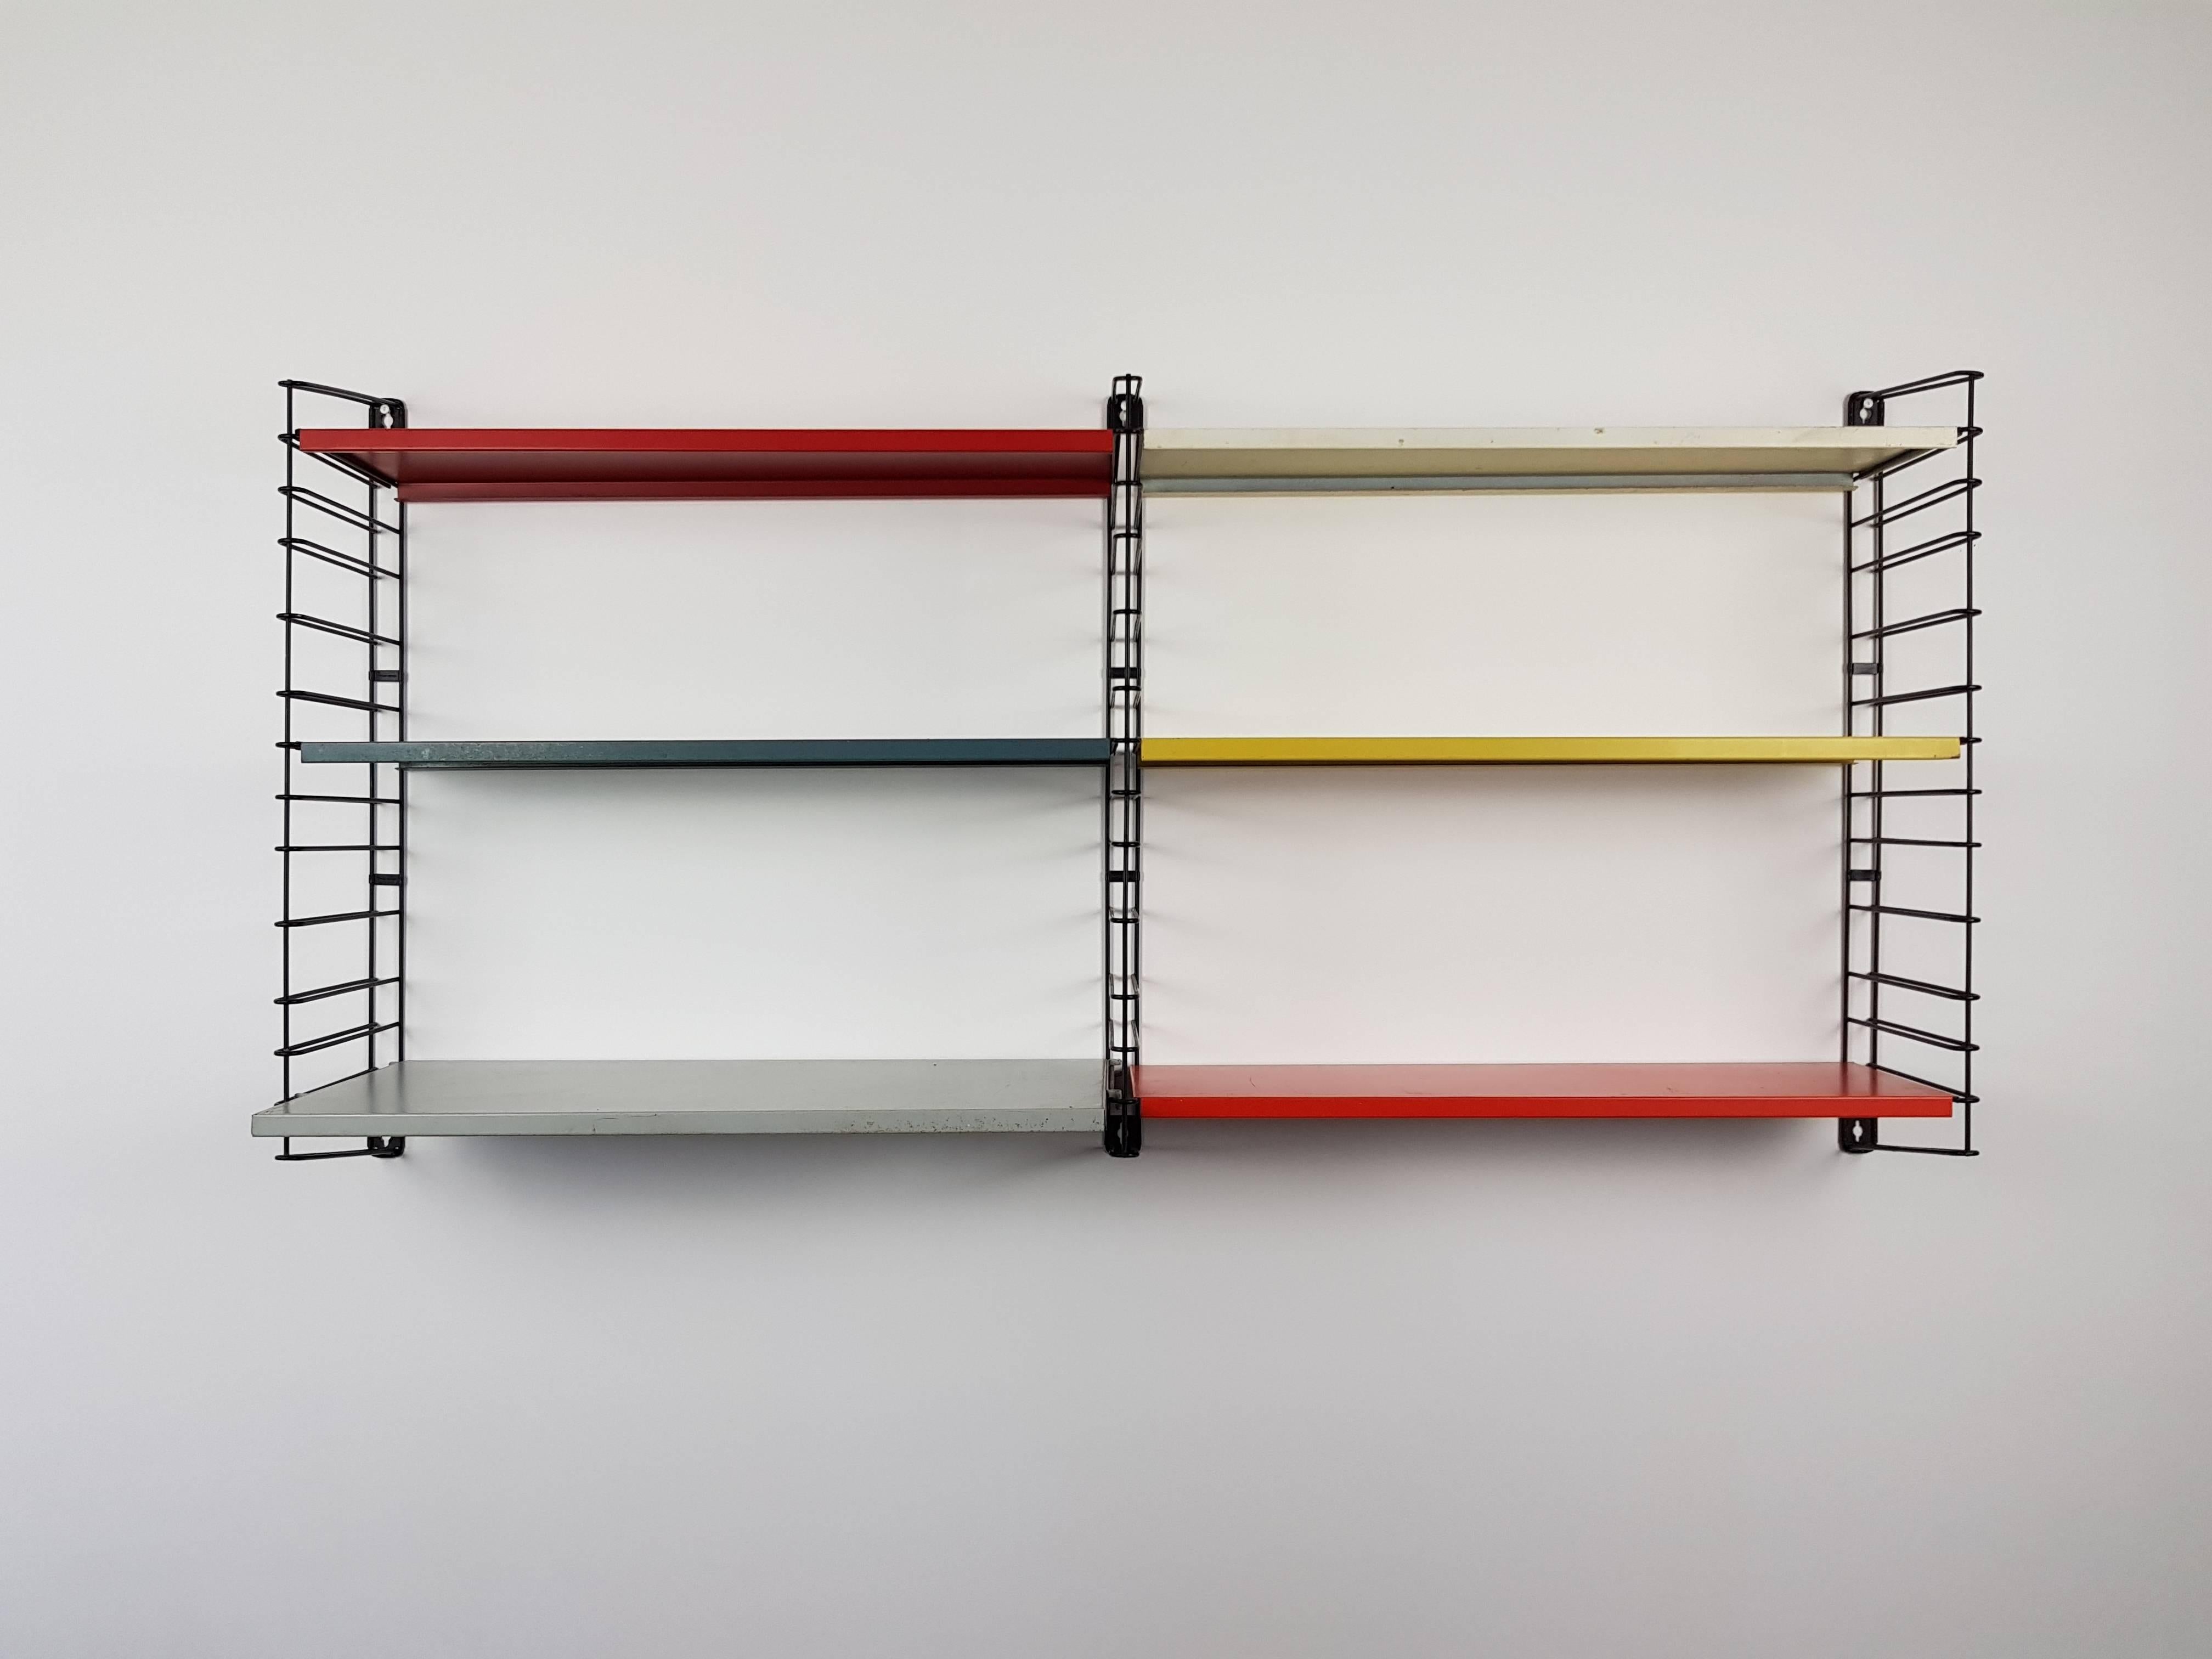 A Dutch design icon, Tomado hanging wall shelves, designed in the 1950s by A. Dekker.

This set featuring a rare perforated tray shelf.
?
Powder coated frame and adjustable steel shelves. This design looks amazing in any room and location and